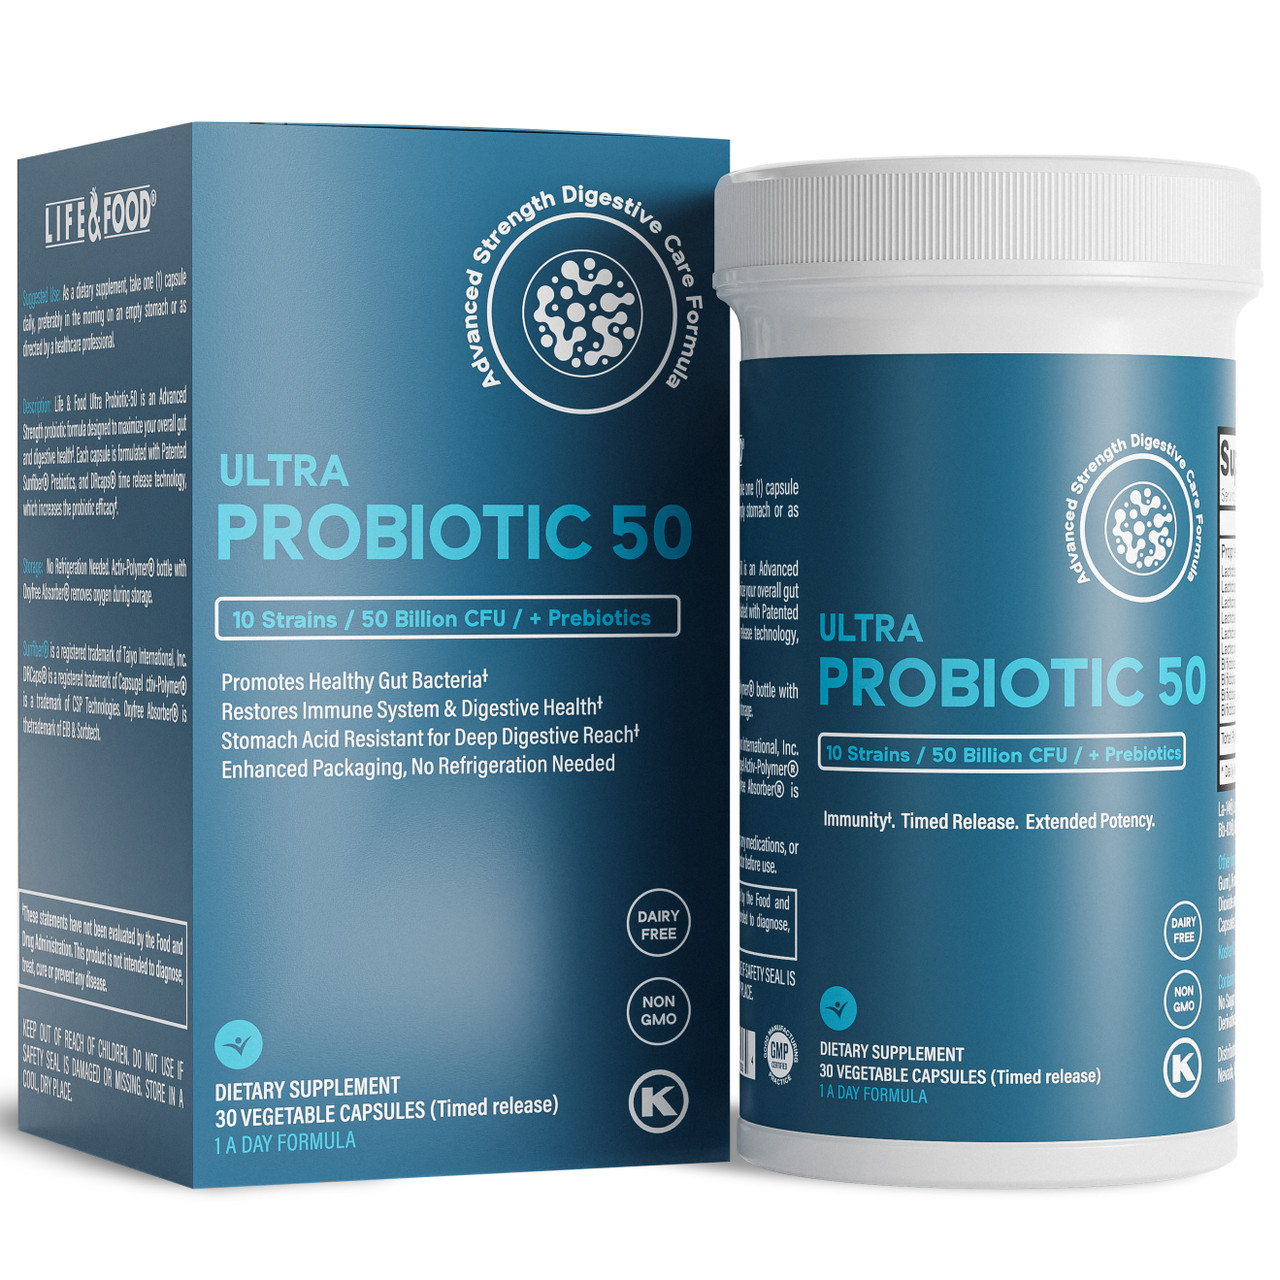 Give your body the support it needs with Probiotic Restore™ ULTRA